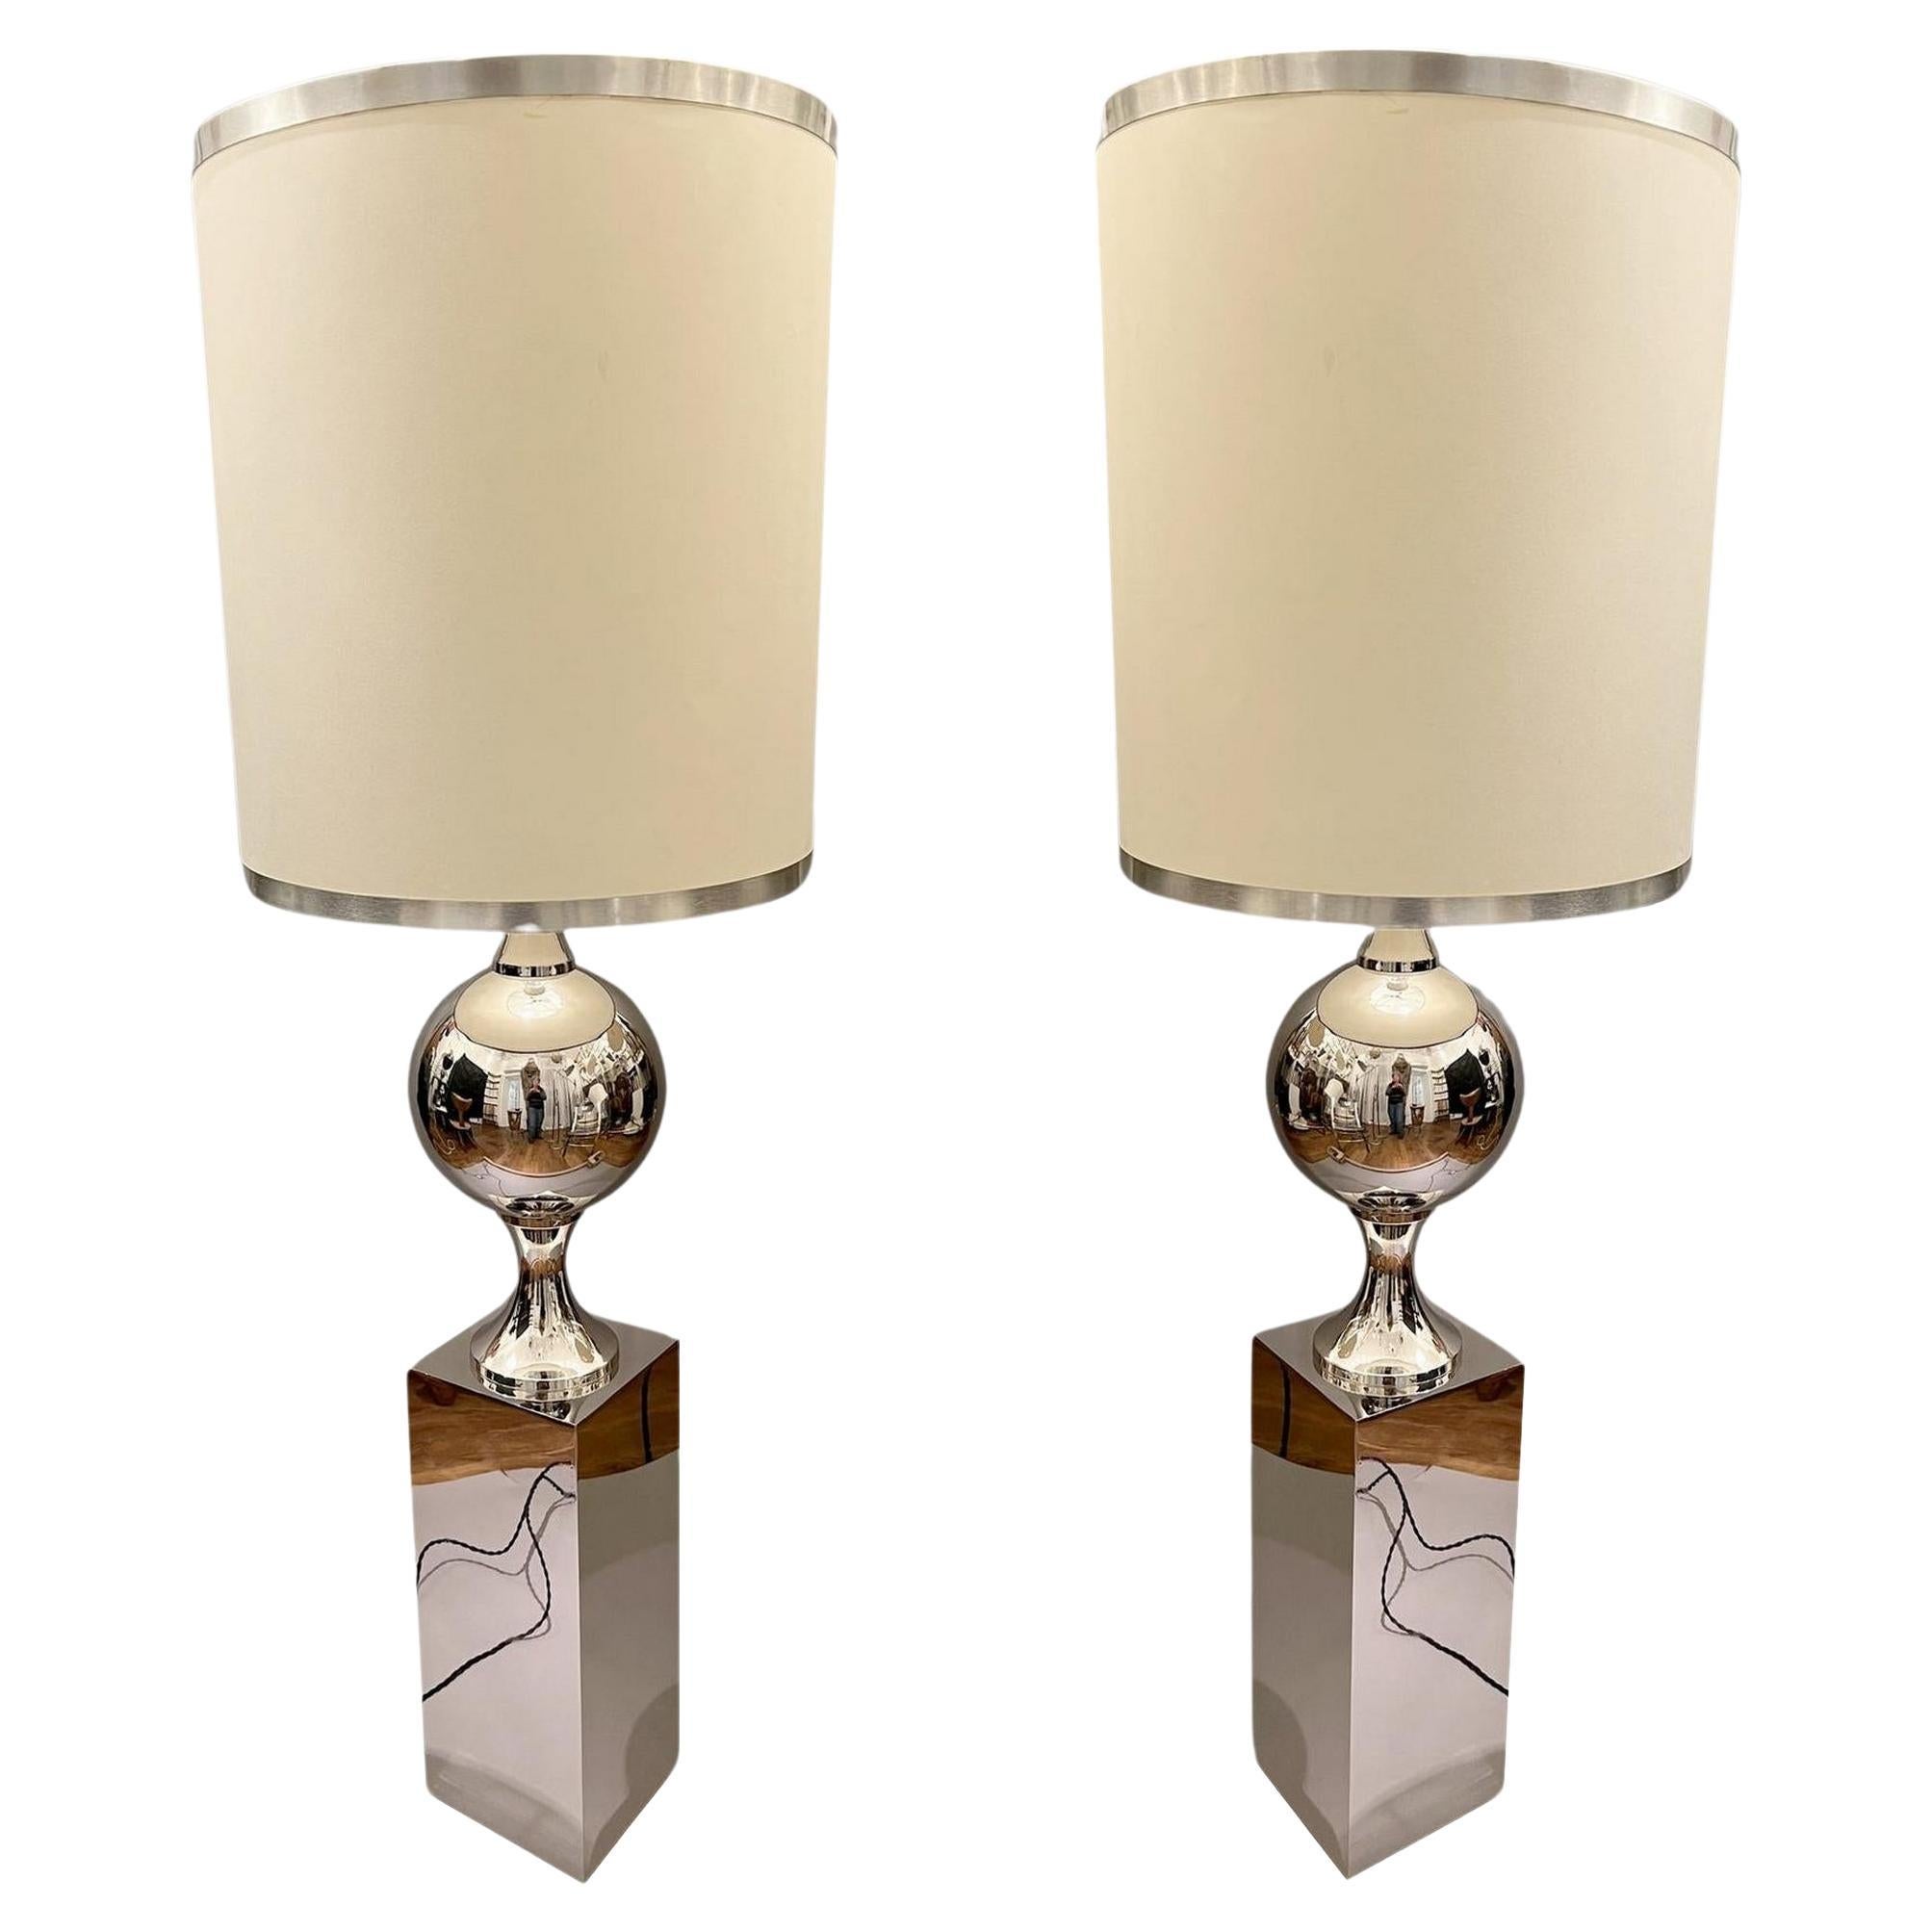 A pair of nickel-plated brass floor lamps by Philippe Barbier France circa 1970